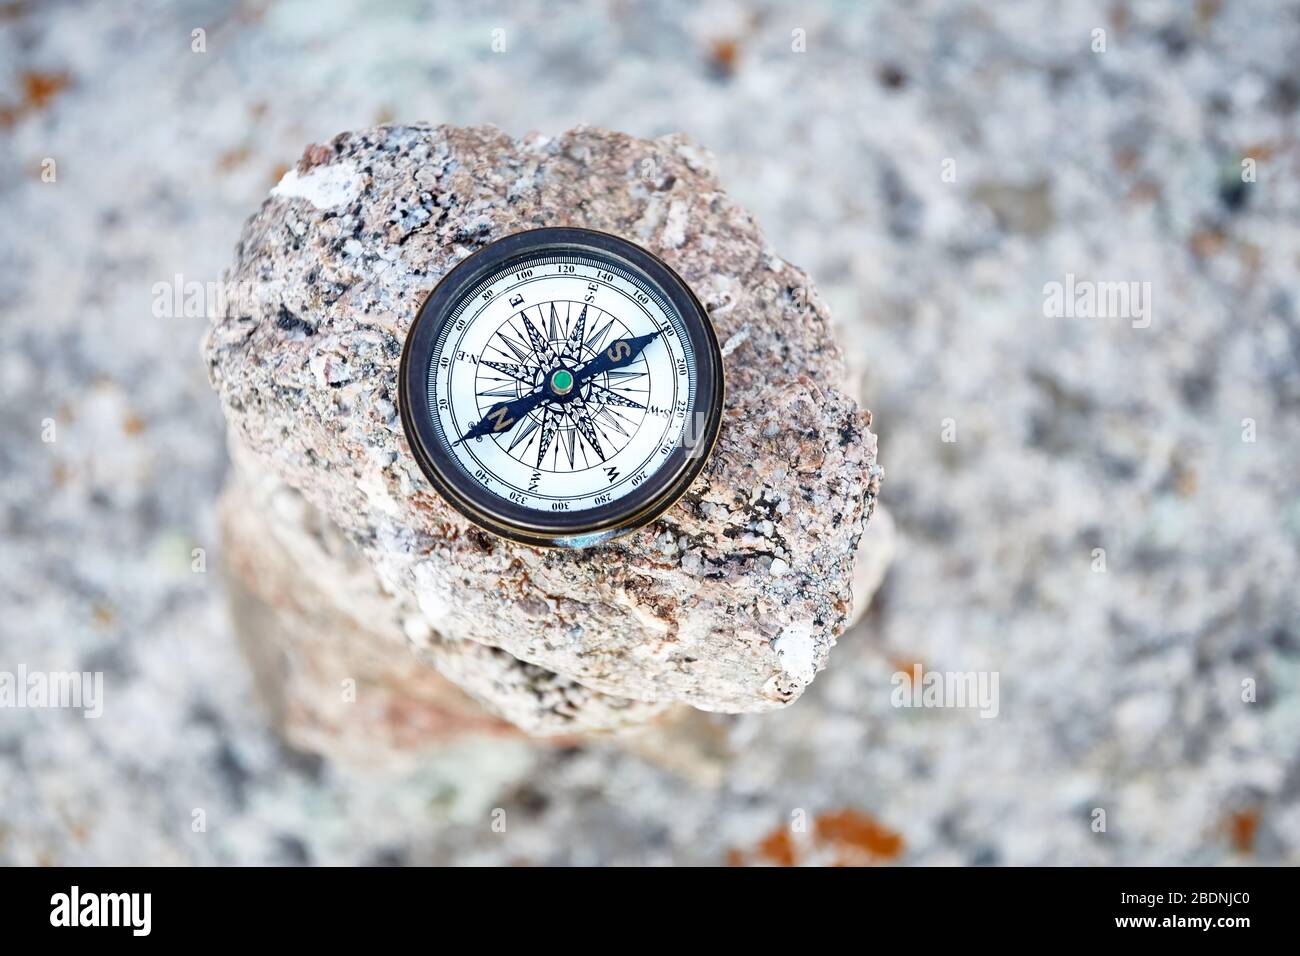 Round Vintage Compass on the stone background. Travel and adventure concept. Stock Photo